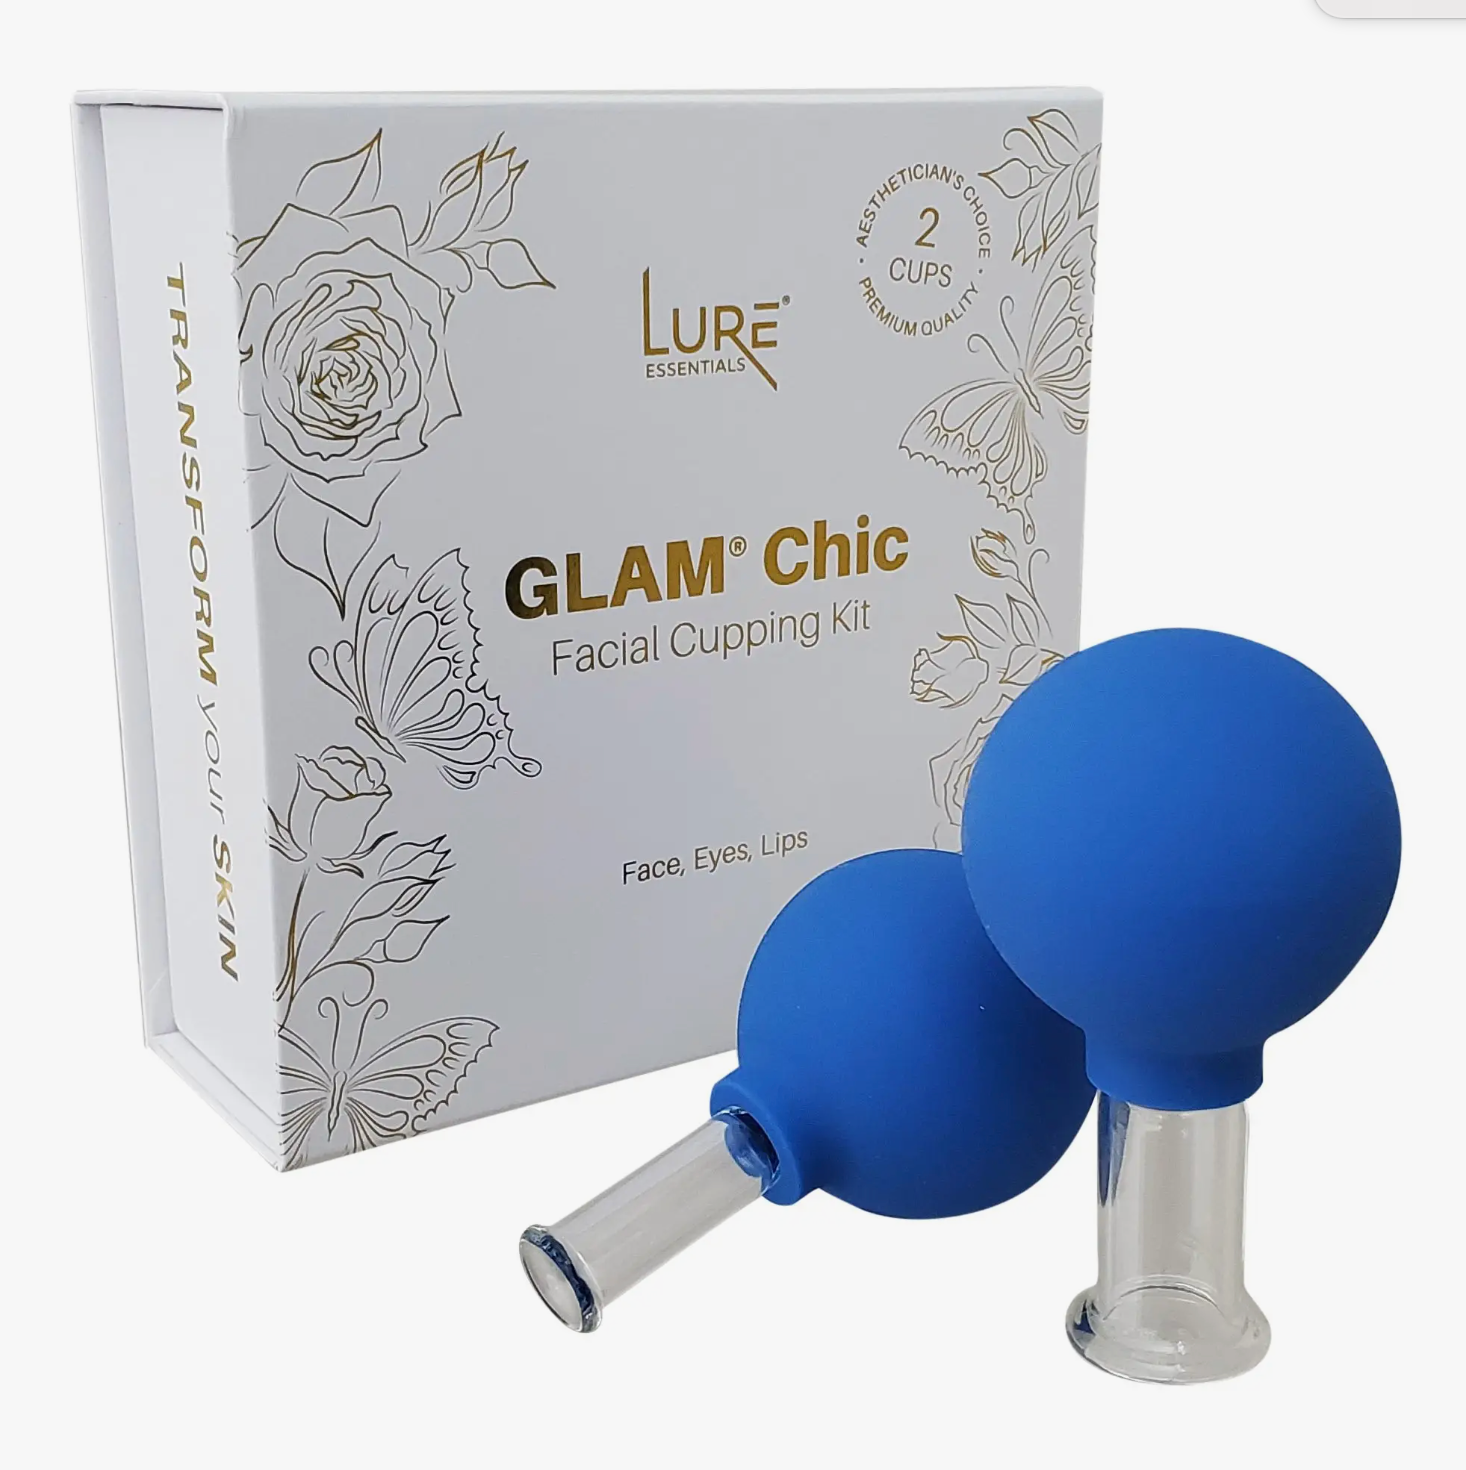 LURE Essentials Glam Chic Facial Cupping Kit - POUT Cosmetics and Skin  Studio